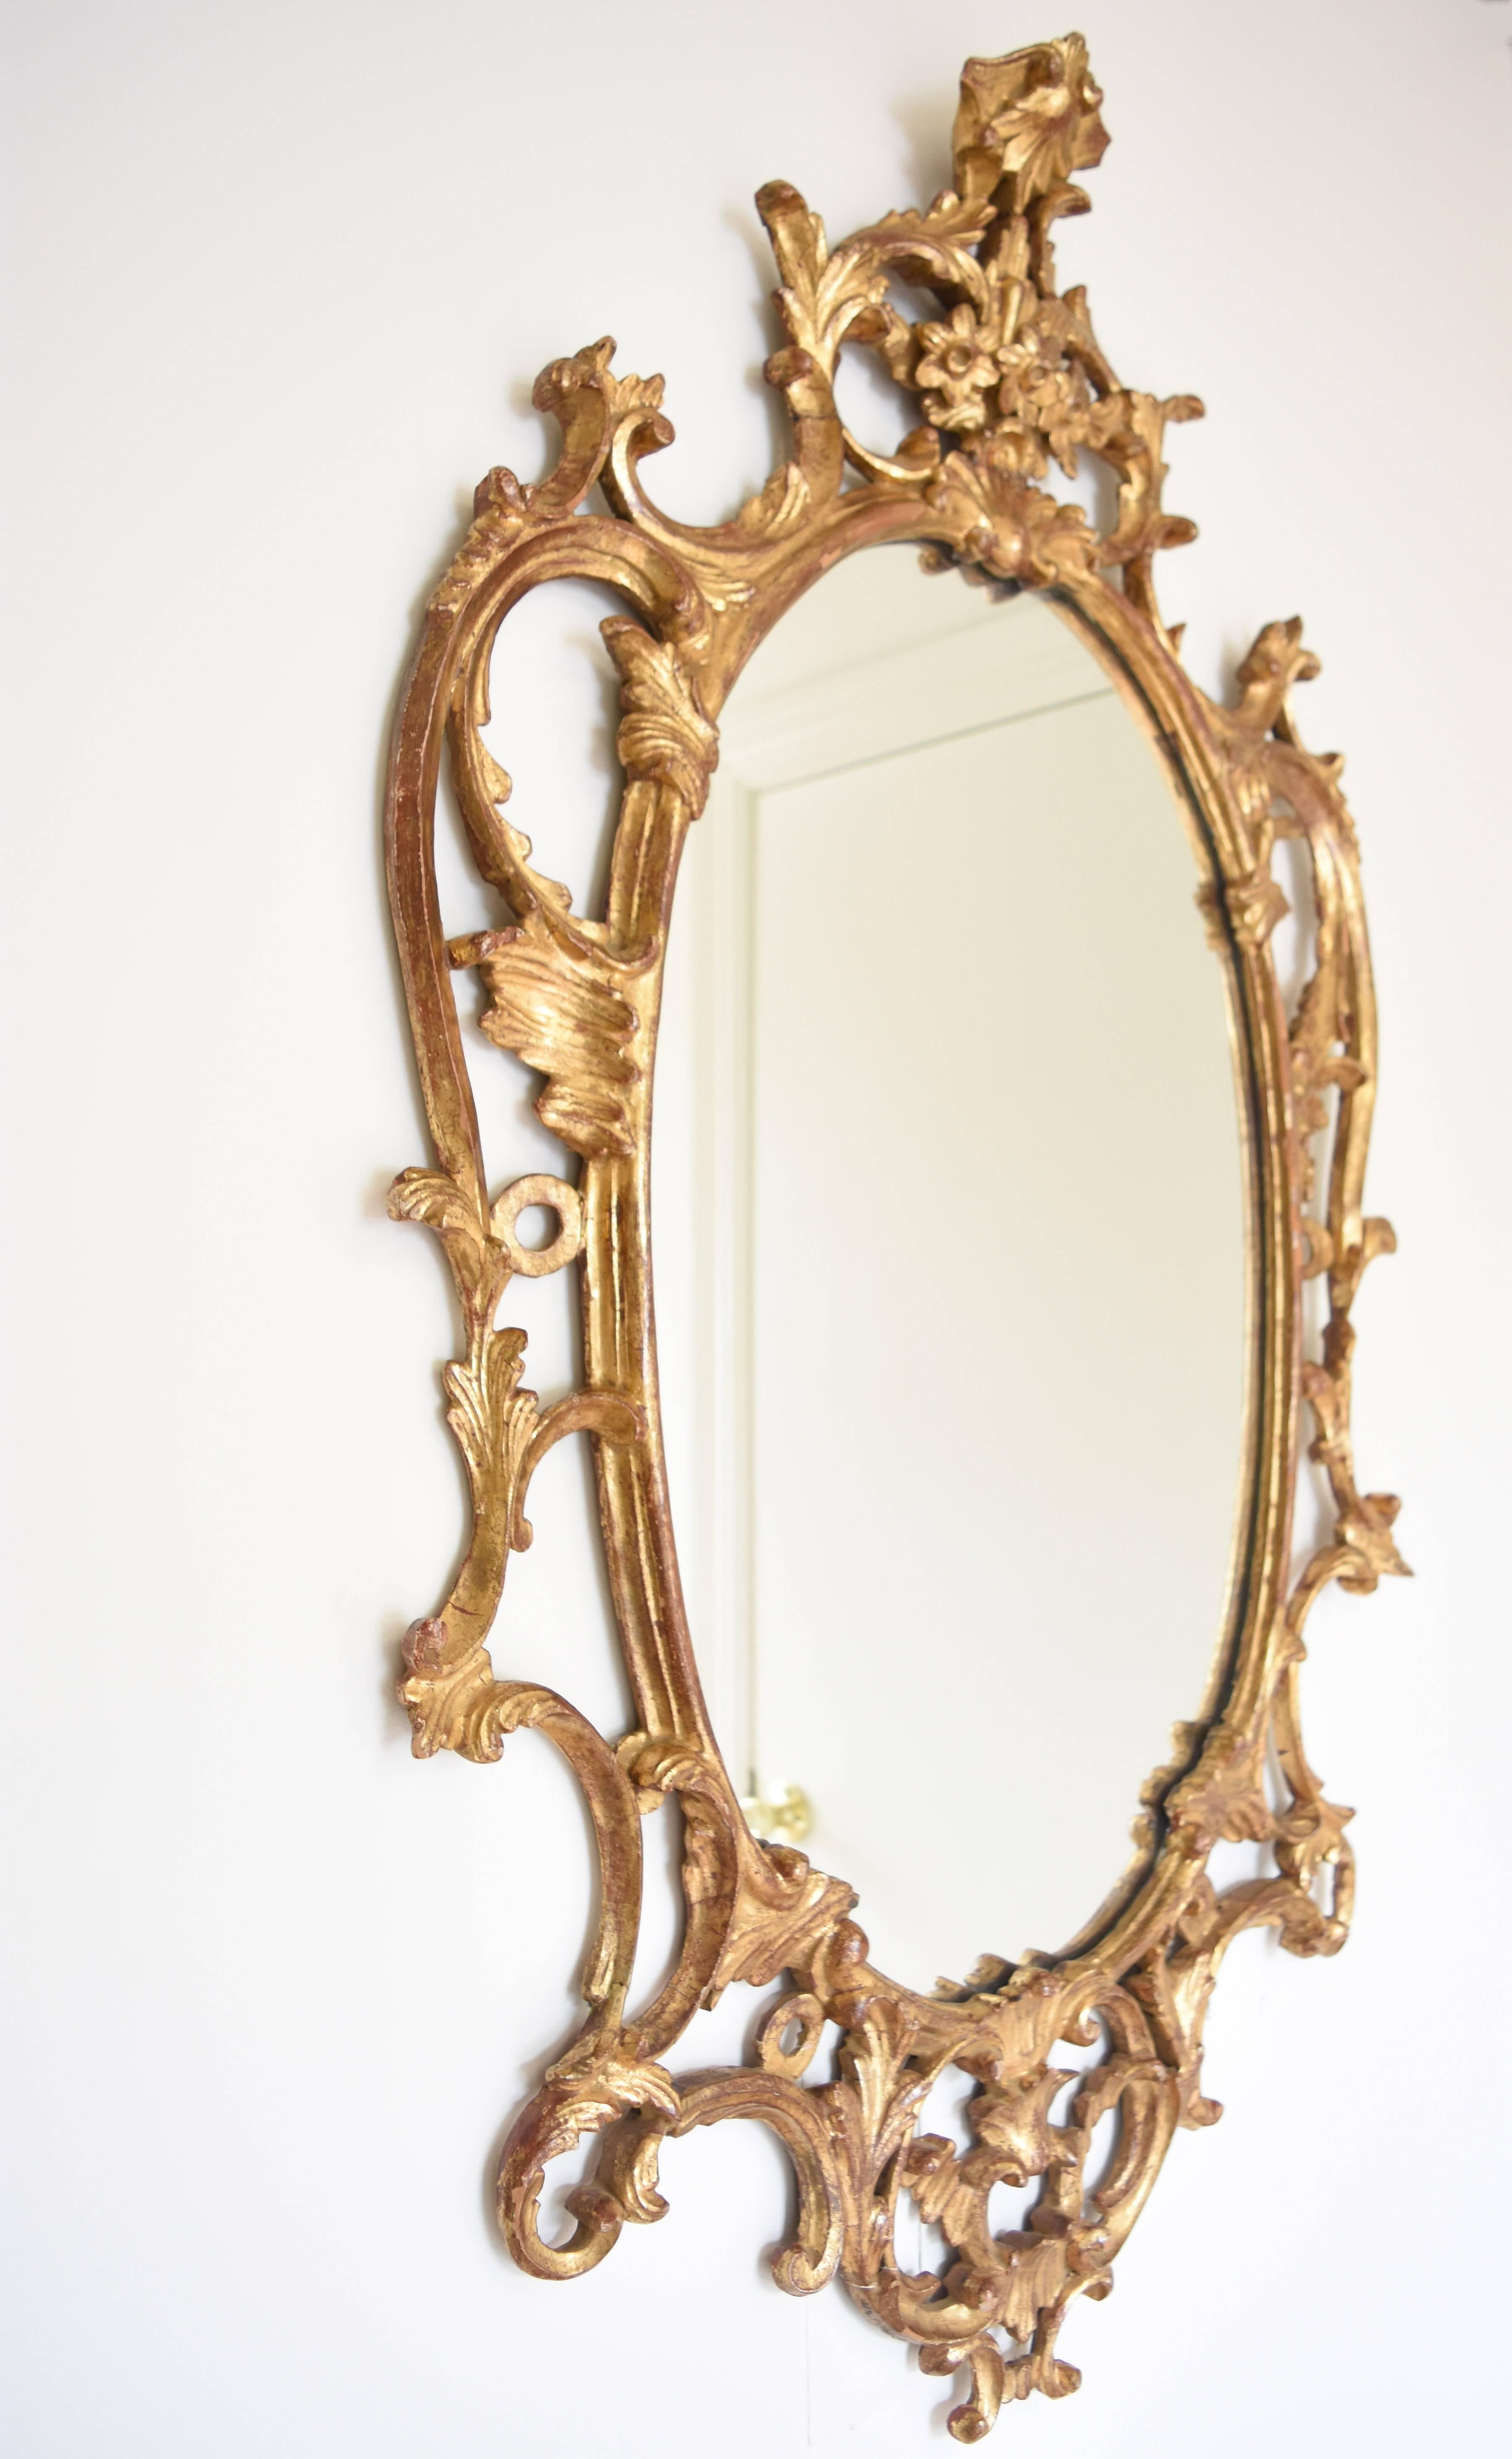 This 19th century giltwood mirror is likely English. It is adorned with finely carved c-scrolls, acanthus leaves and flowers.